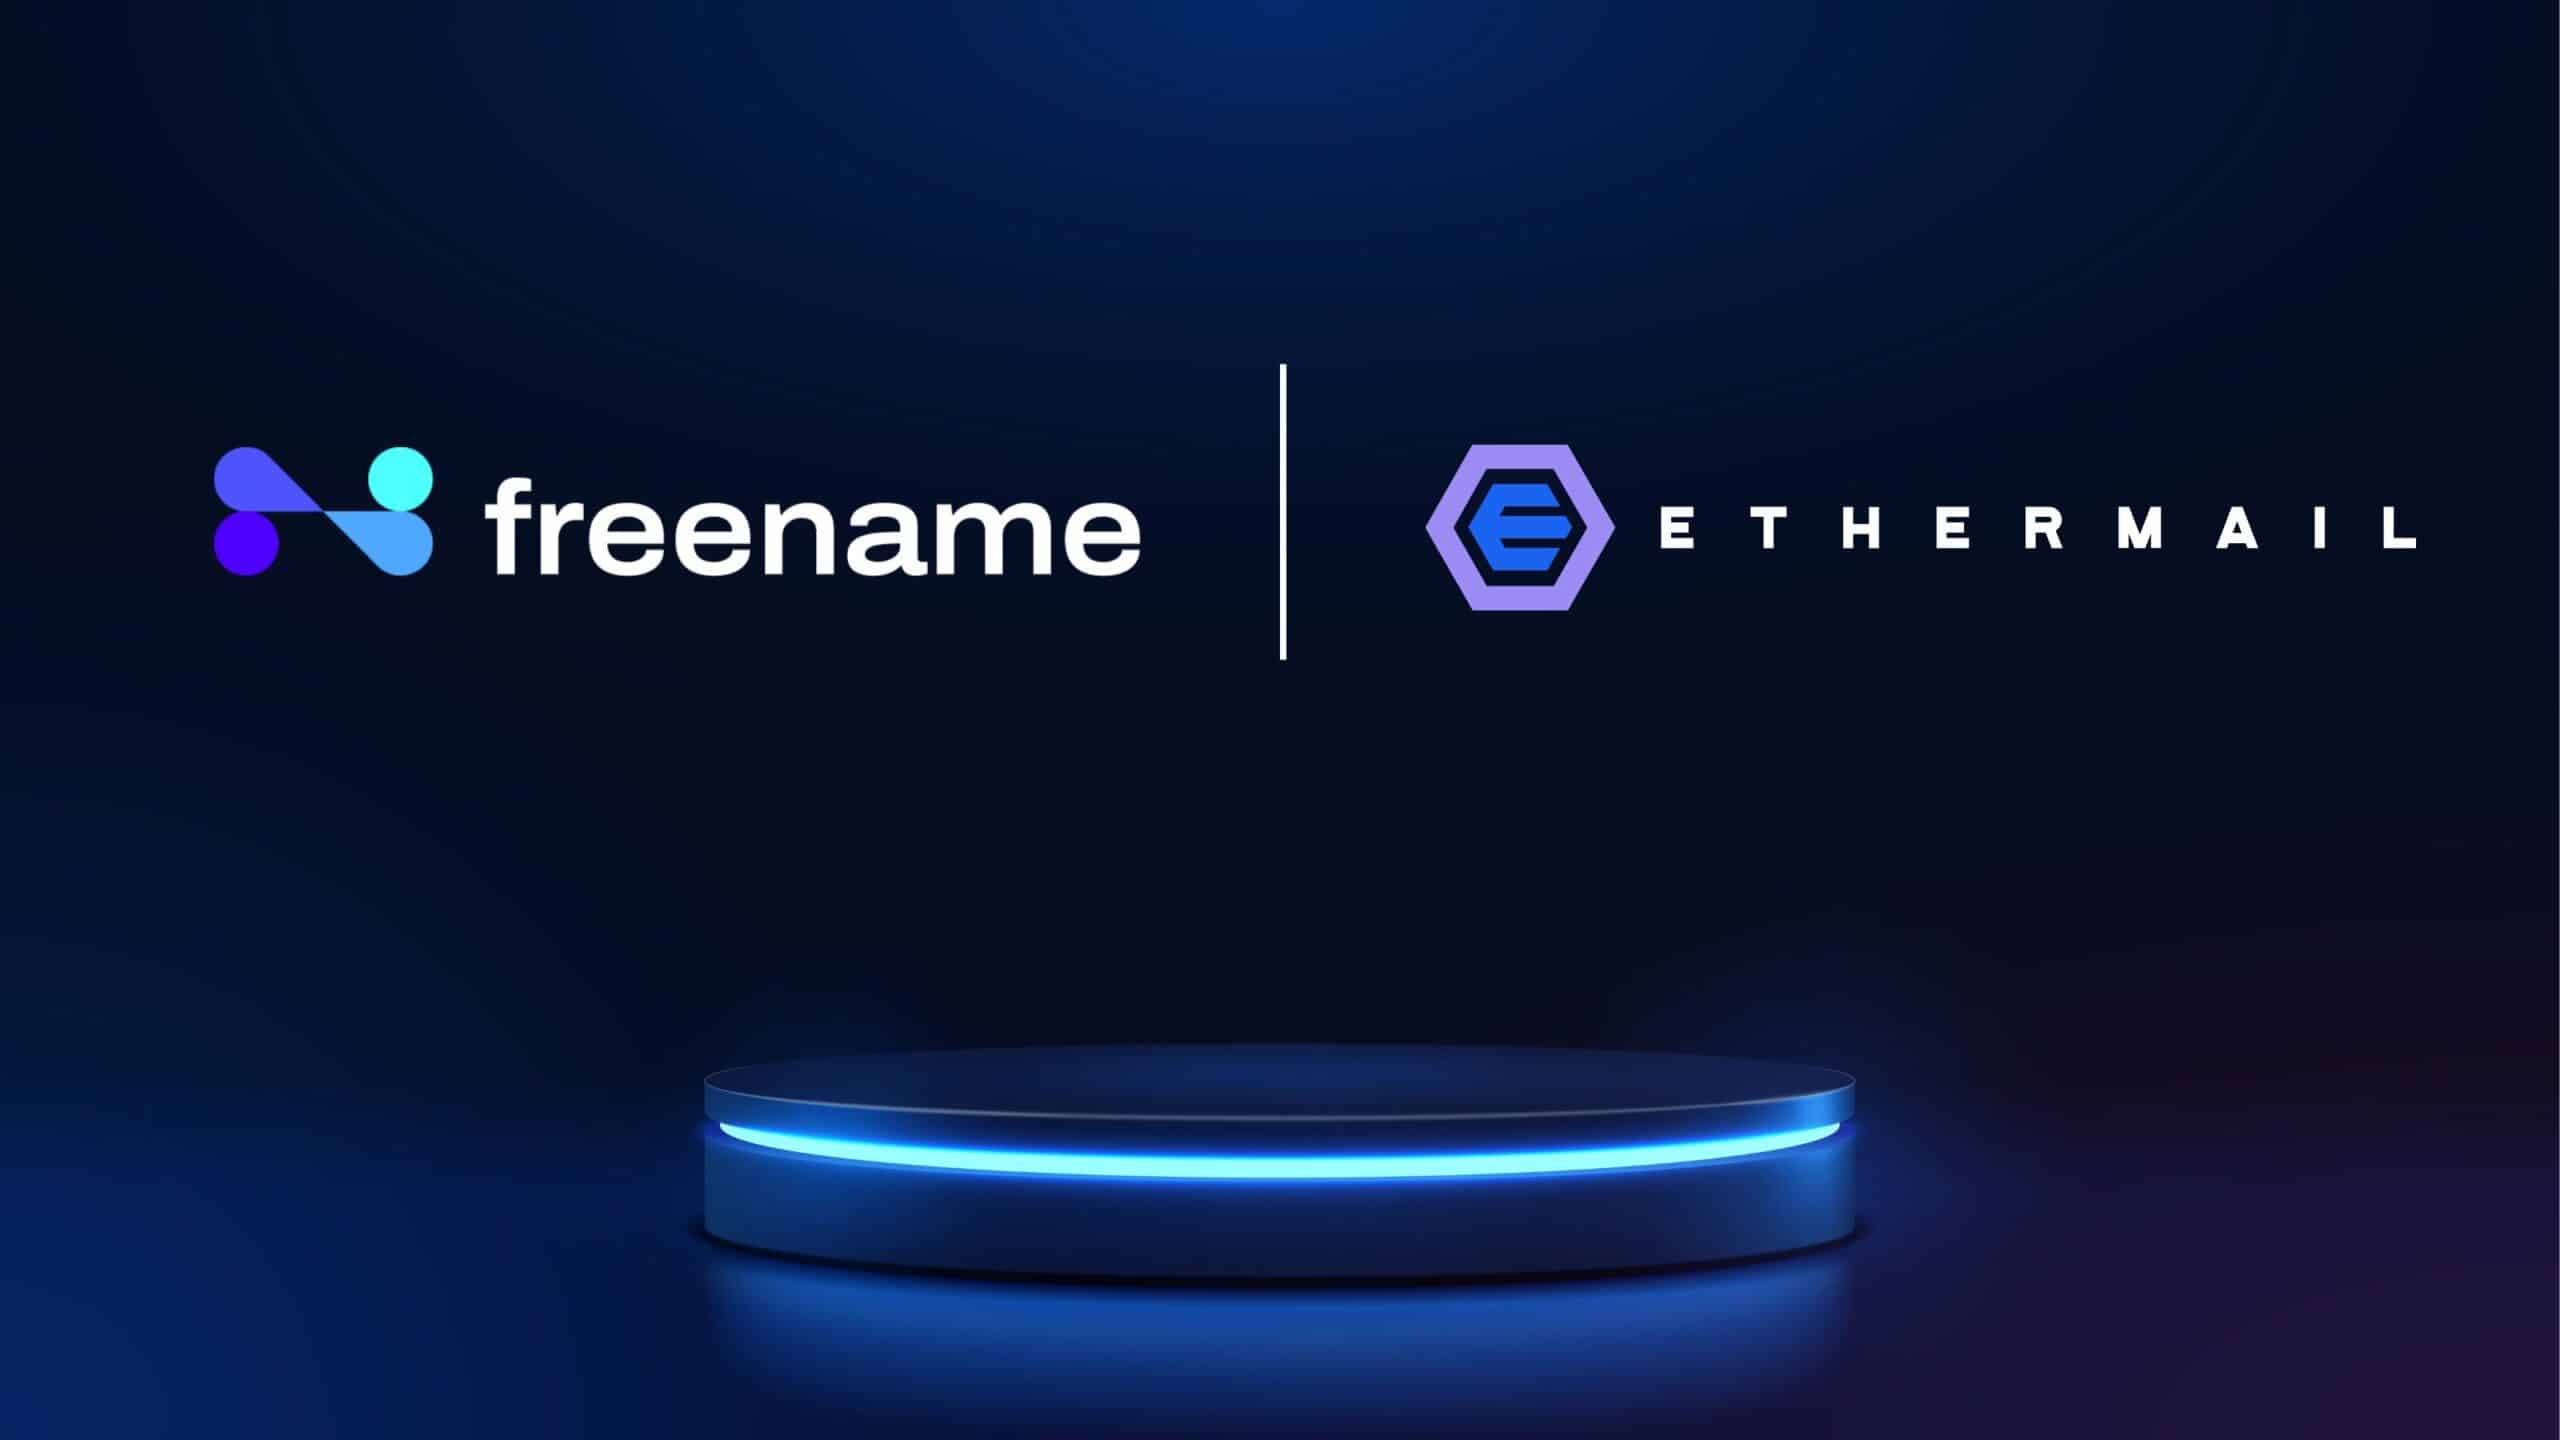 Ethermail-announces-integration-with-freename-in-latest-web3-email-milestone